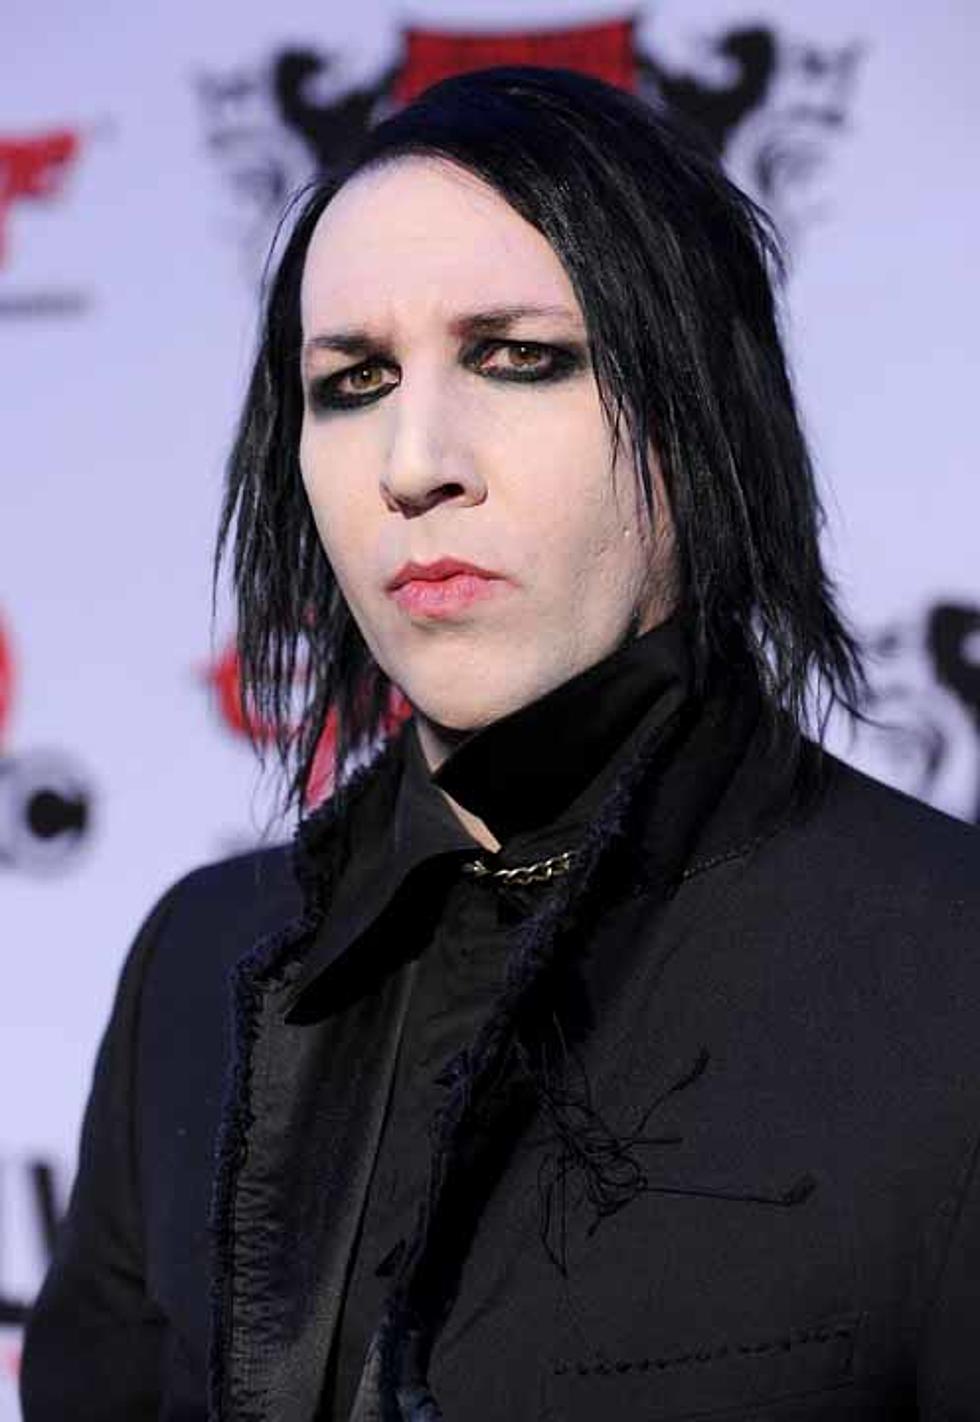 Marilyn Manson on WE ARE CHAOS, Pandemic, and Favorite Bowie Album